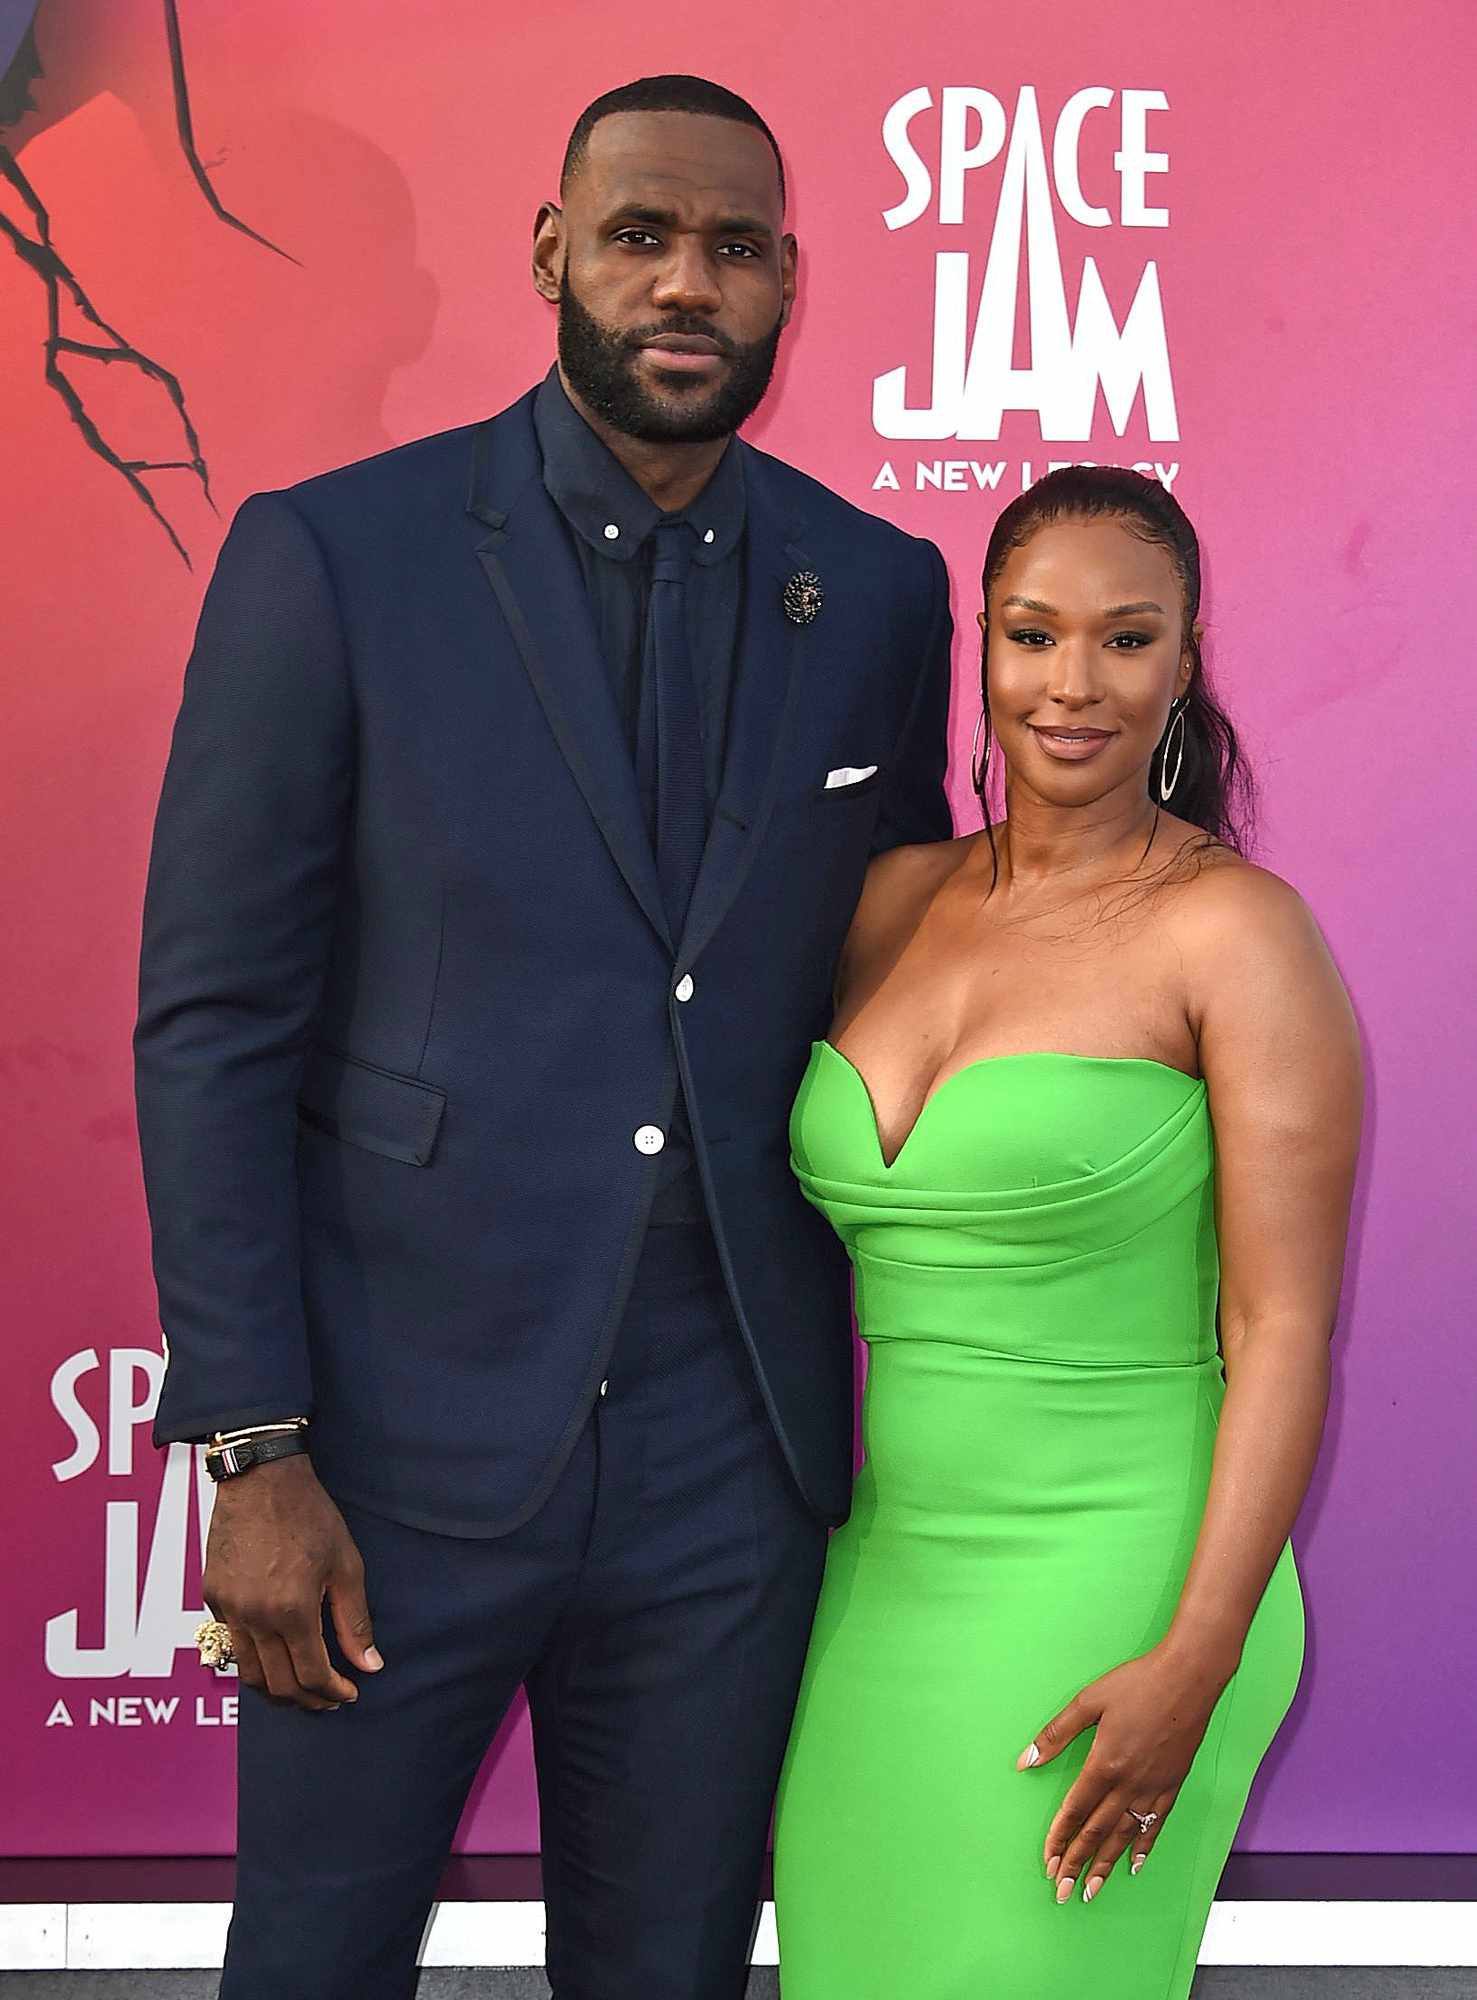 LeBron James and and Savannah Brinson arrive at the world premiere of "Space Jam: A New Legacy", at Regal L.A. Live in Los Angeles World Premiere of "Space Jam: A New Legacy", Los Angeles, United States - 12 Jul 2021